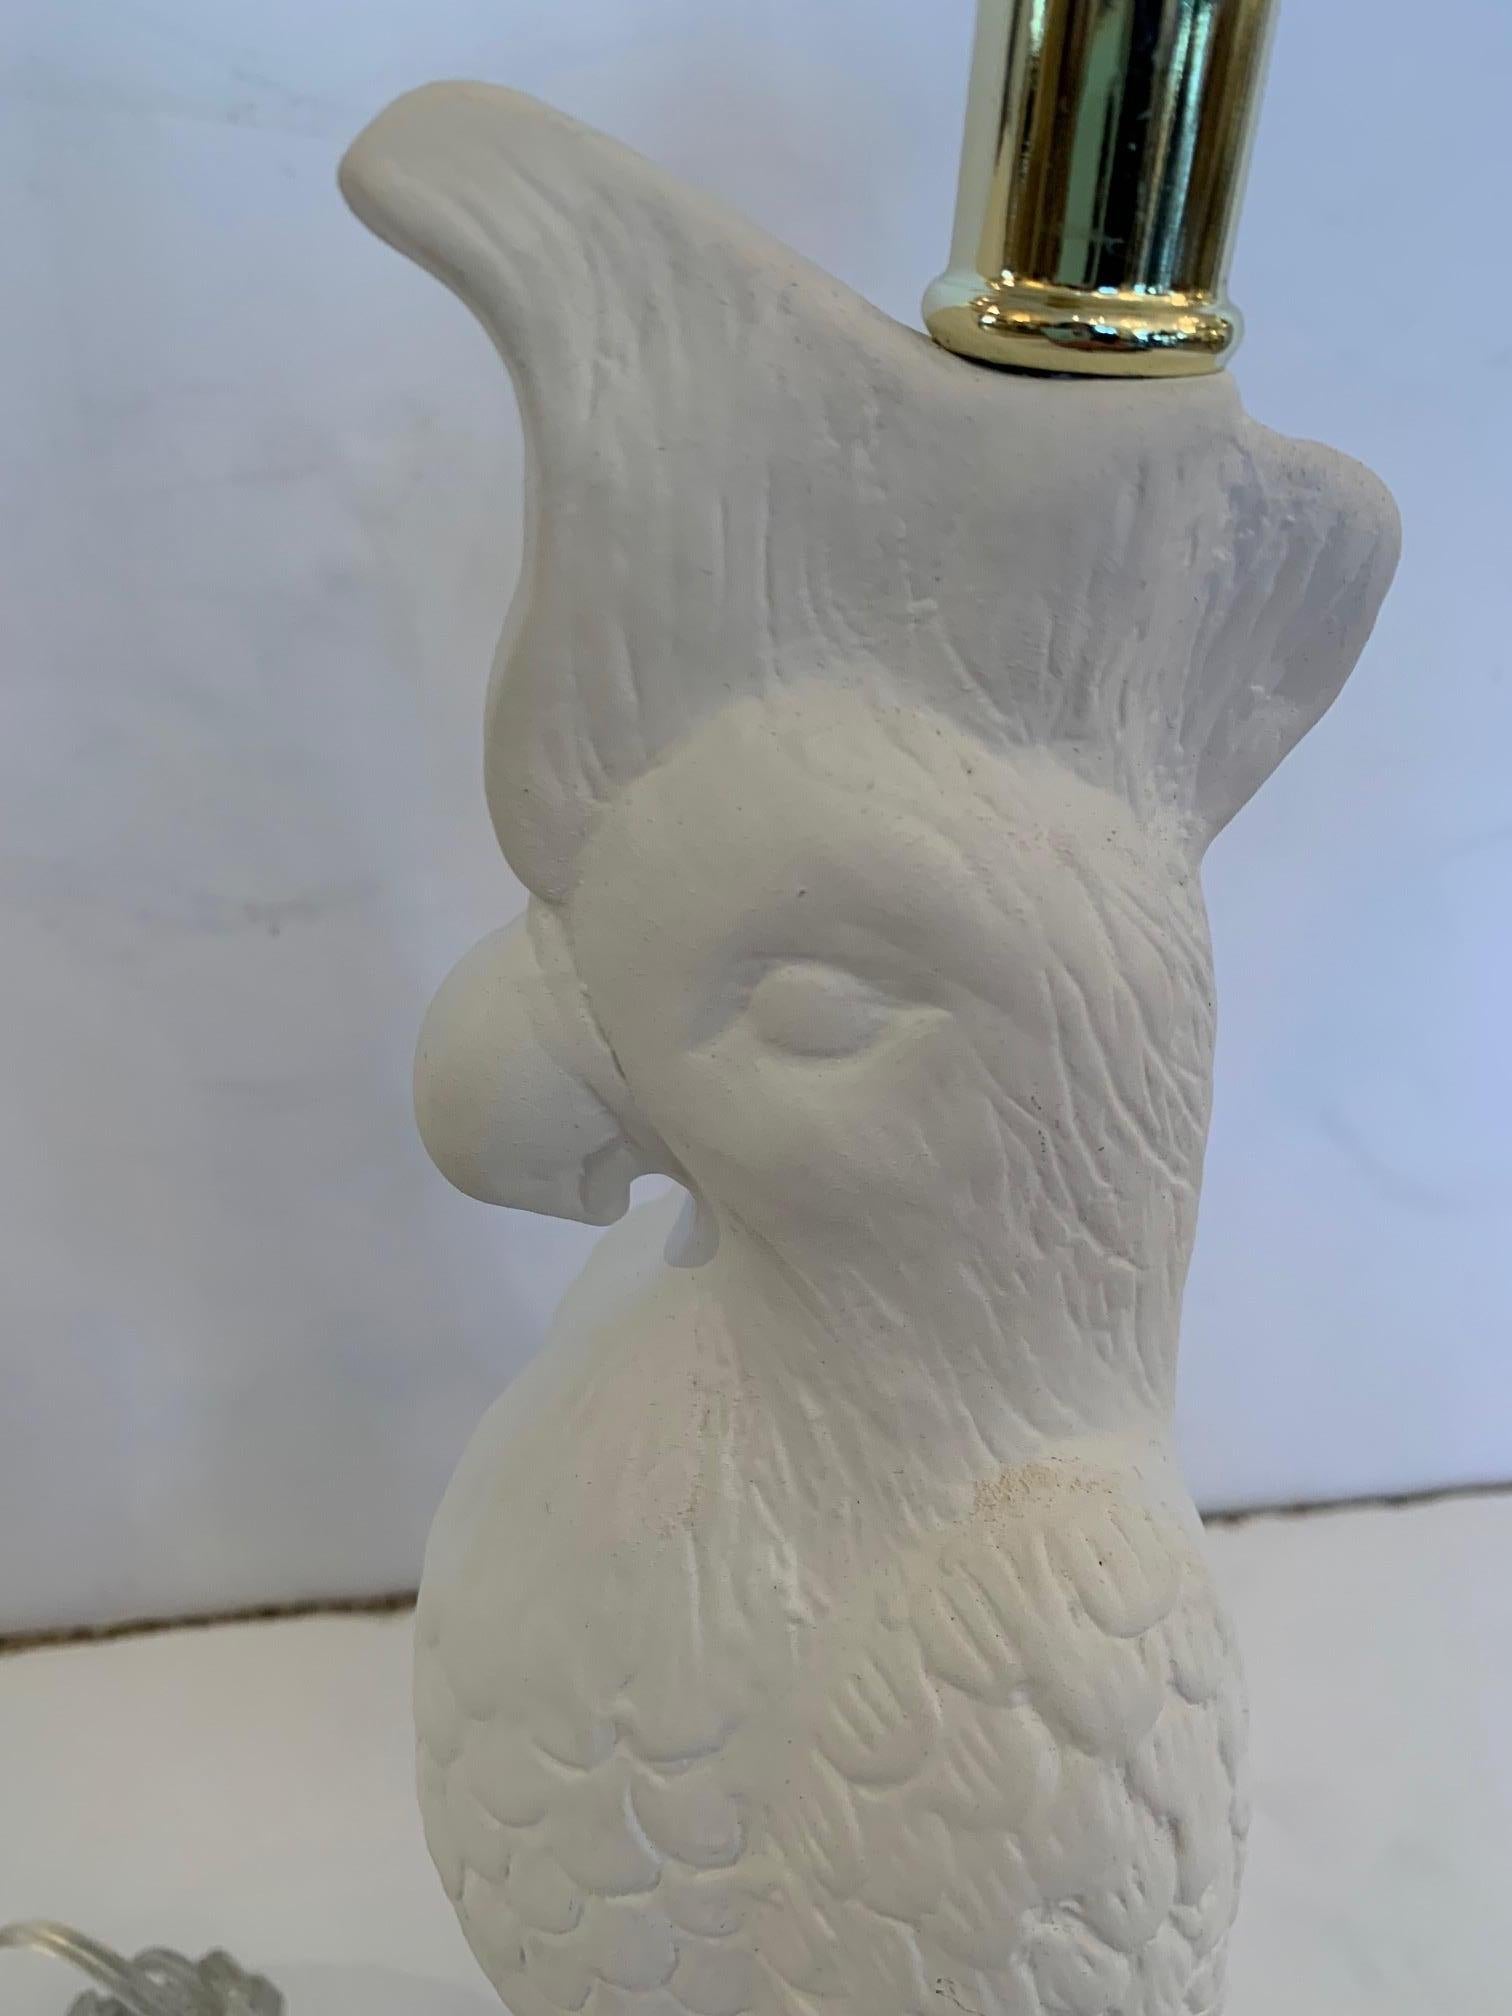 Stylish White Ceramic Parrot Shaped Table Lamp In Good Condition For Sale In Hopewell, NJ